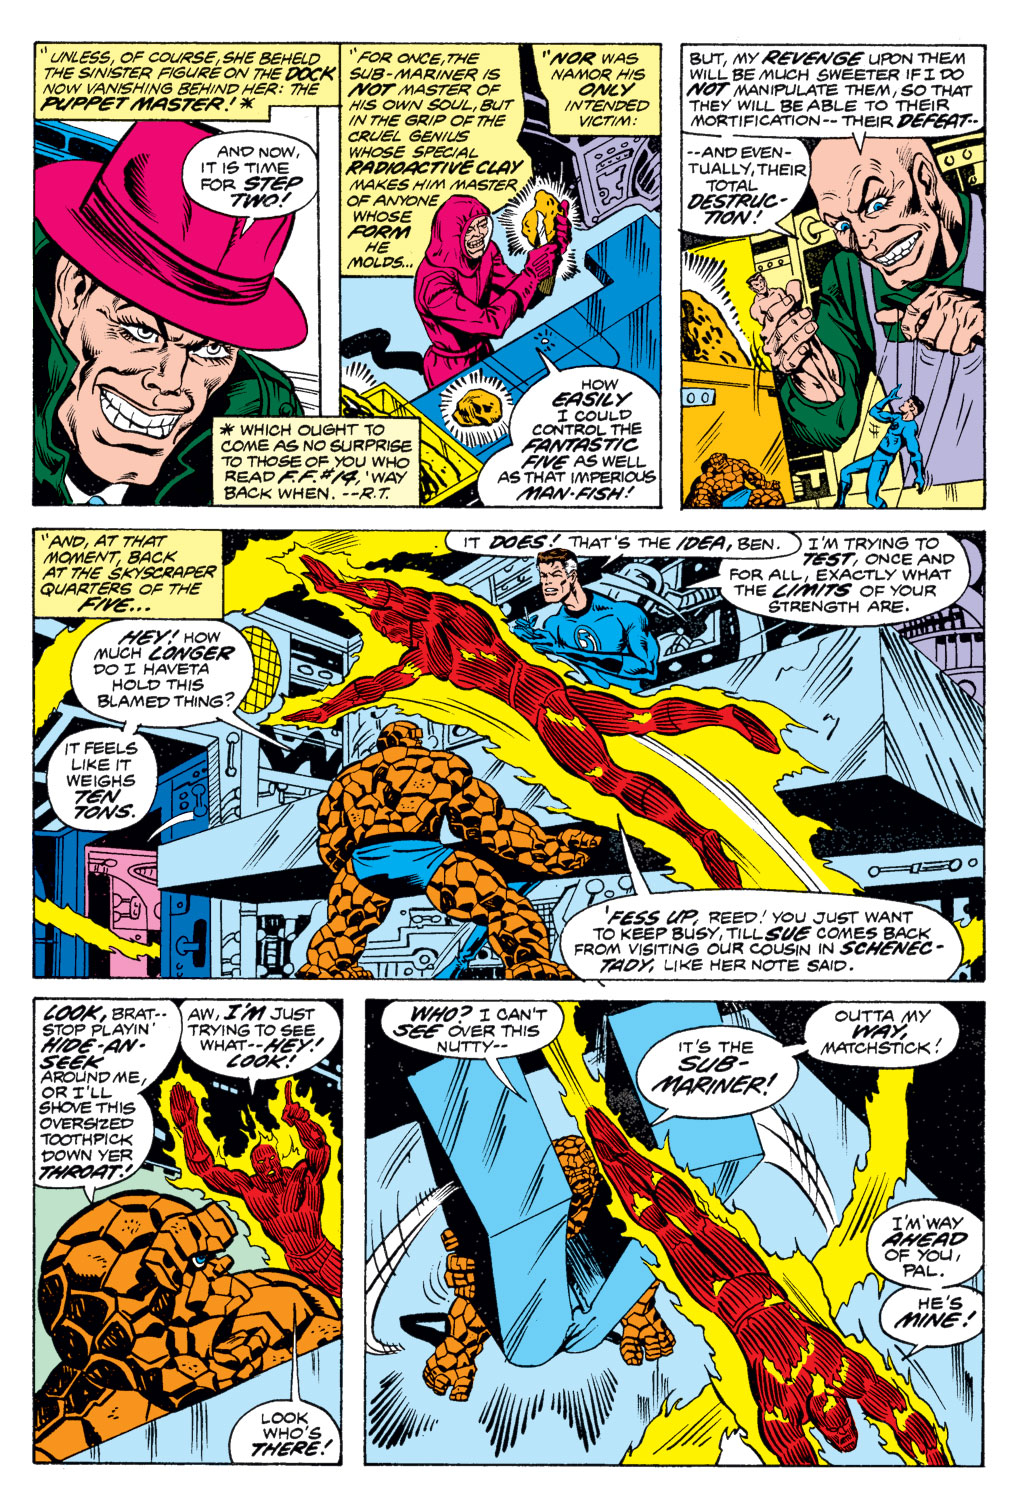 What If? (1977) issue 1 - Spider-Man joined the Fantastic Four - Page 21